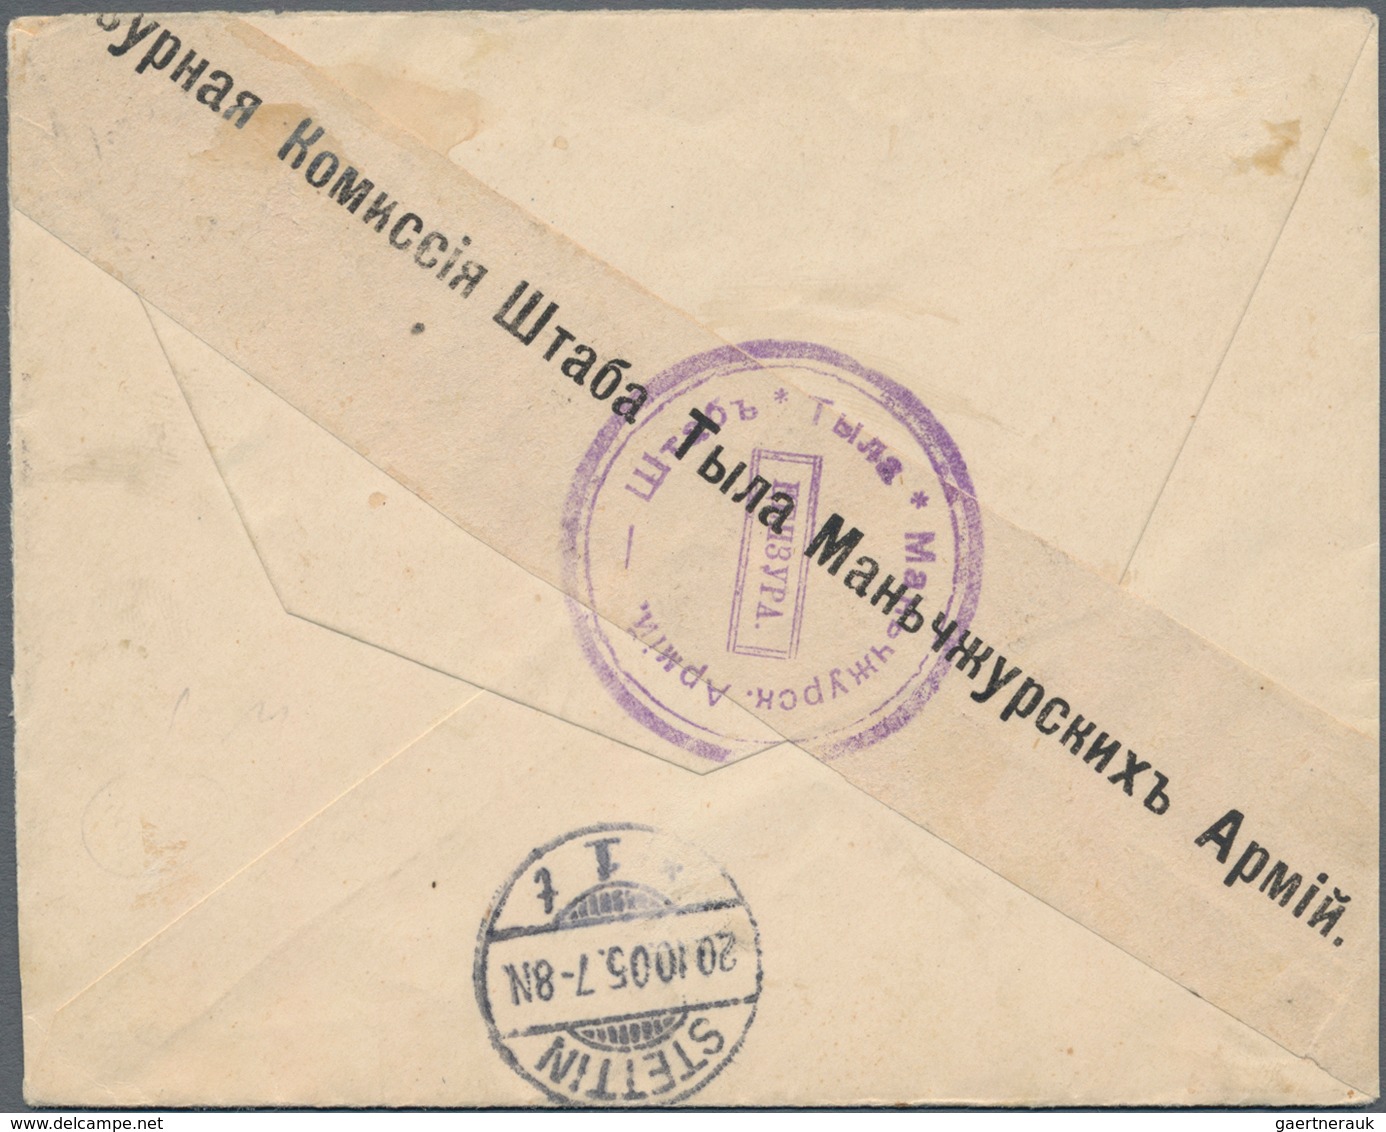 Russische Post In China: 23.09.1905 Russo-Japanese War Cover From HEAD FIELD POST OFFICE To Stettin - China